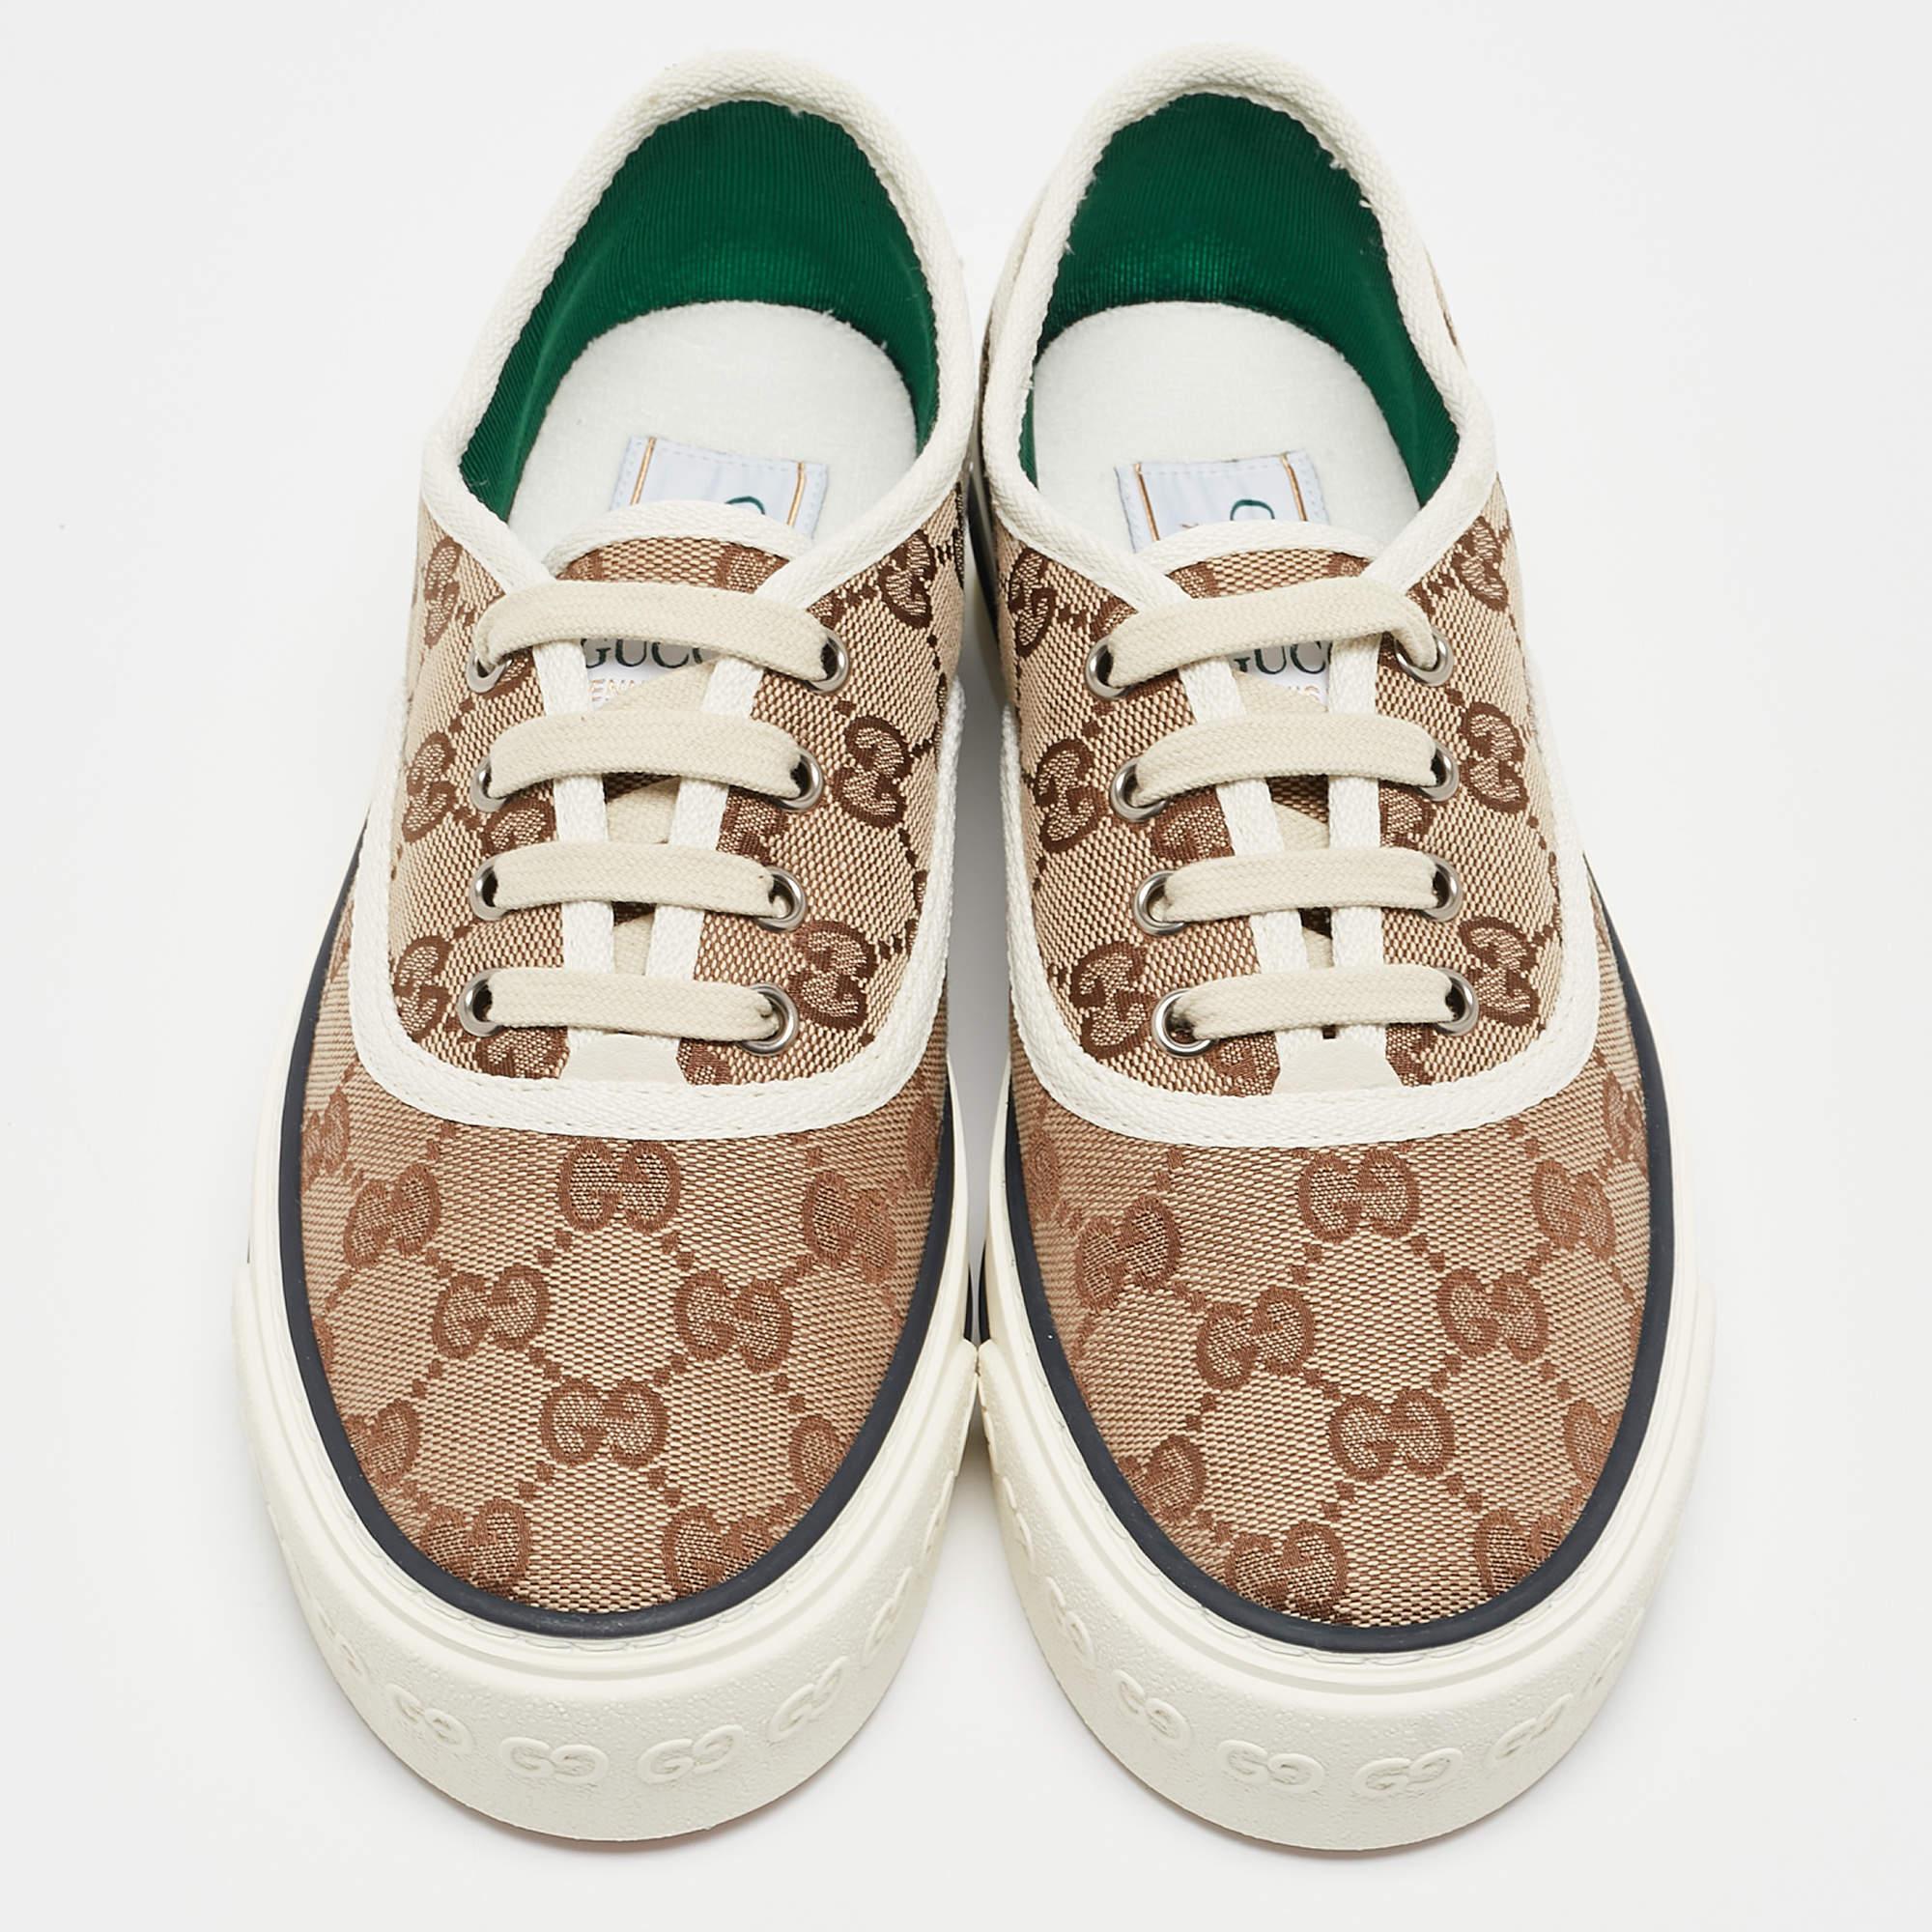 Coming in a classic silhouette, these Gucci Tennis 1977 sneakers are a seamless combination of luxury, comfort, and style. These sneakers are finished with signature details and comfortable insoles.

Includes: Original Dustbag, Original Box, Extra